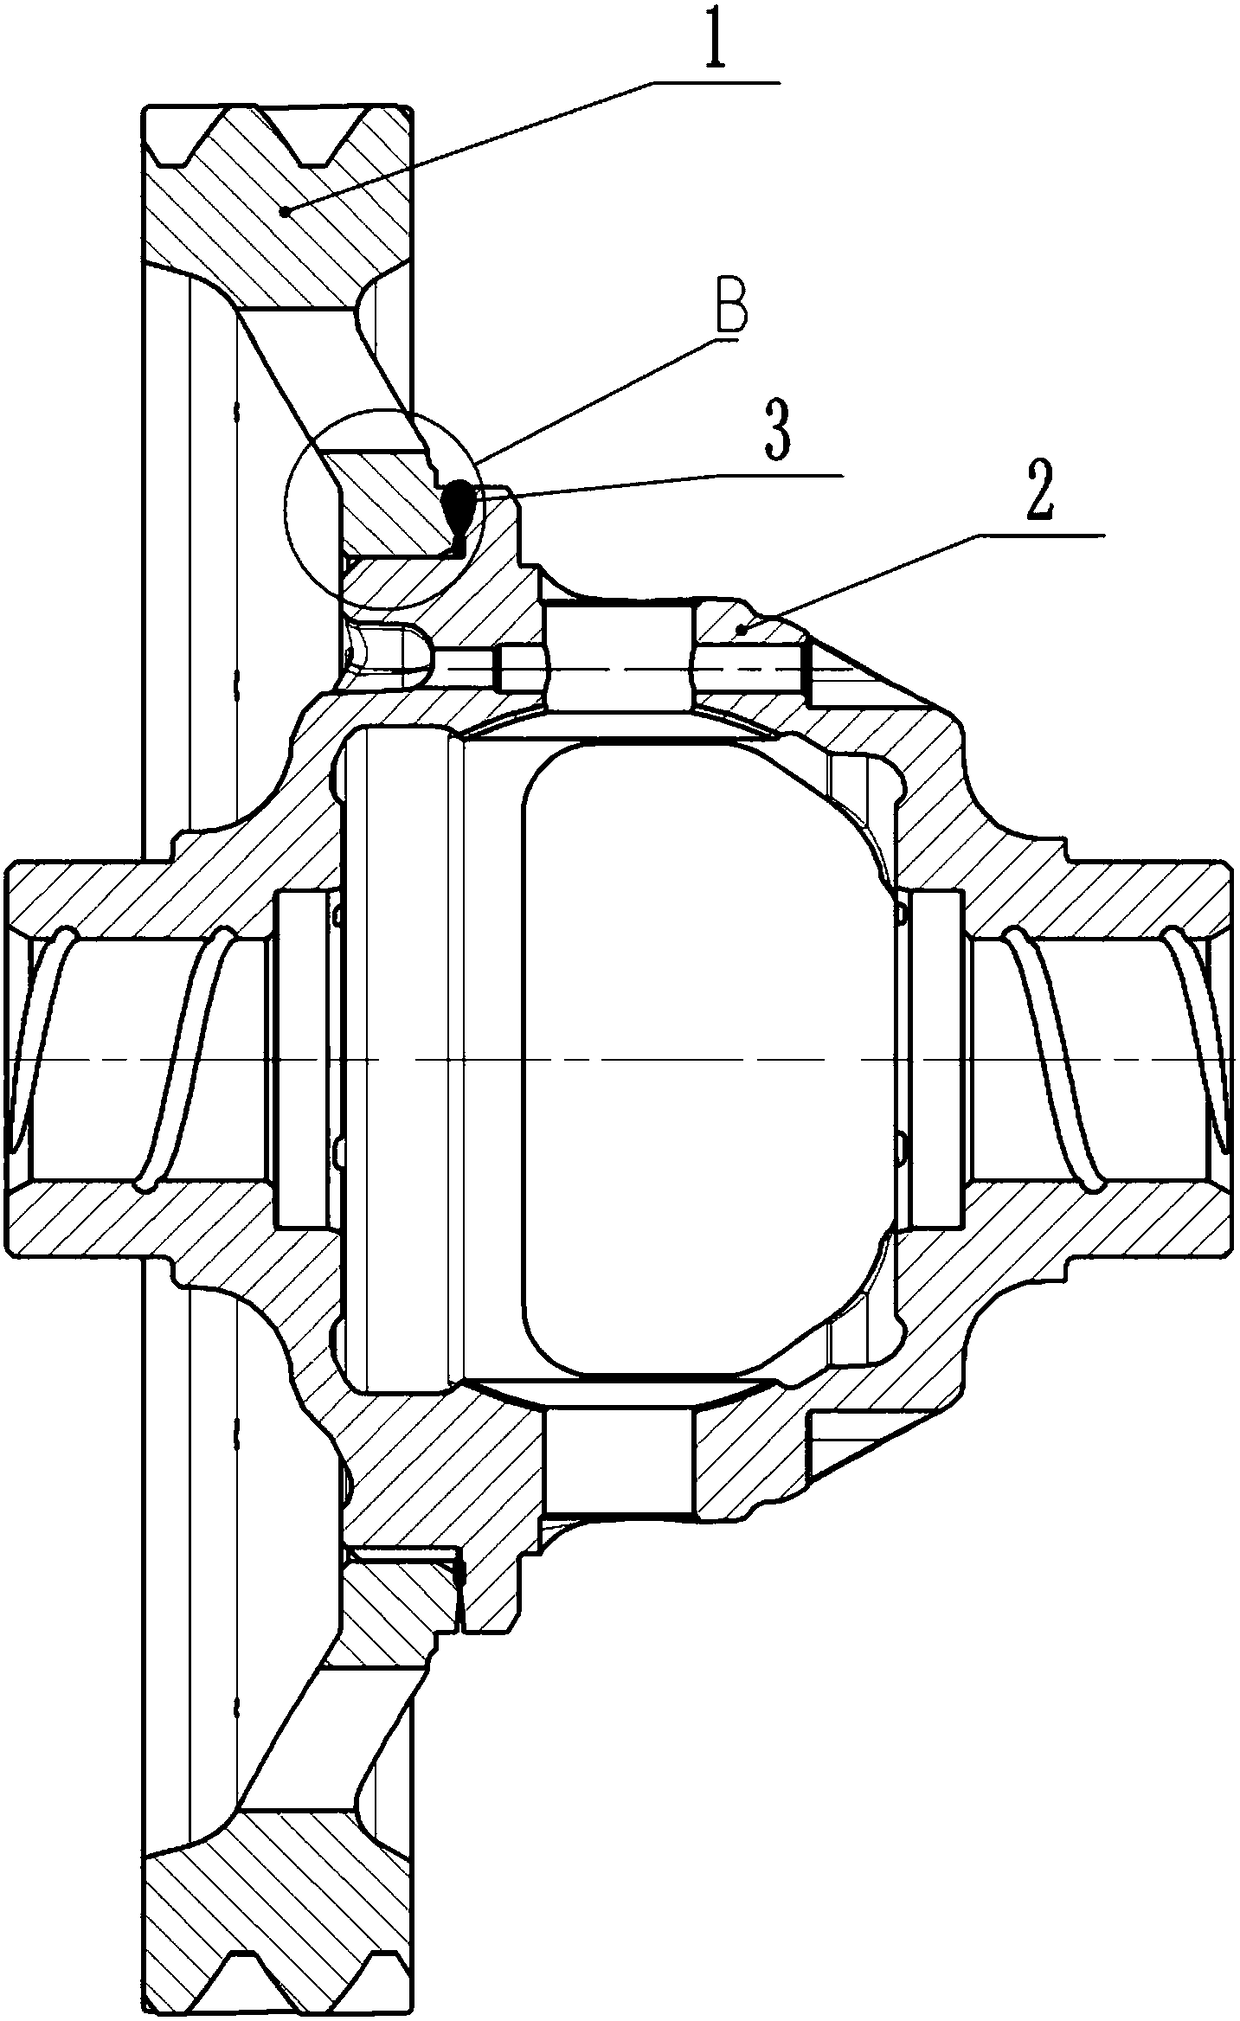 Welding technology of differential mechanism assembly